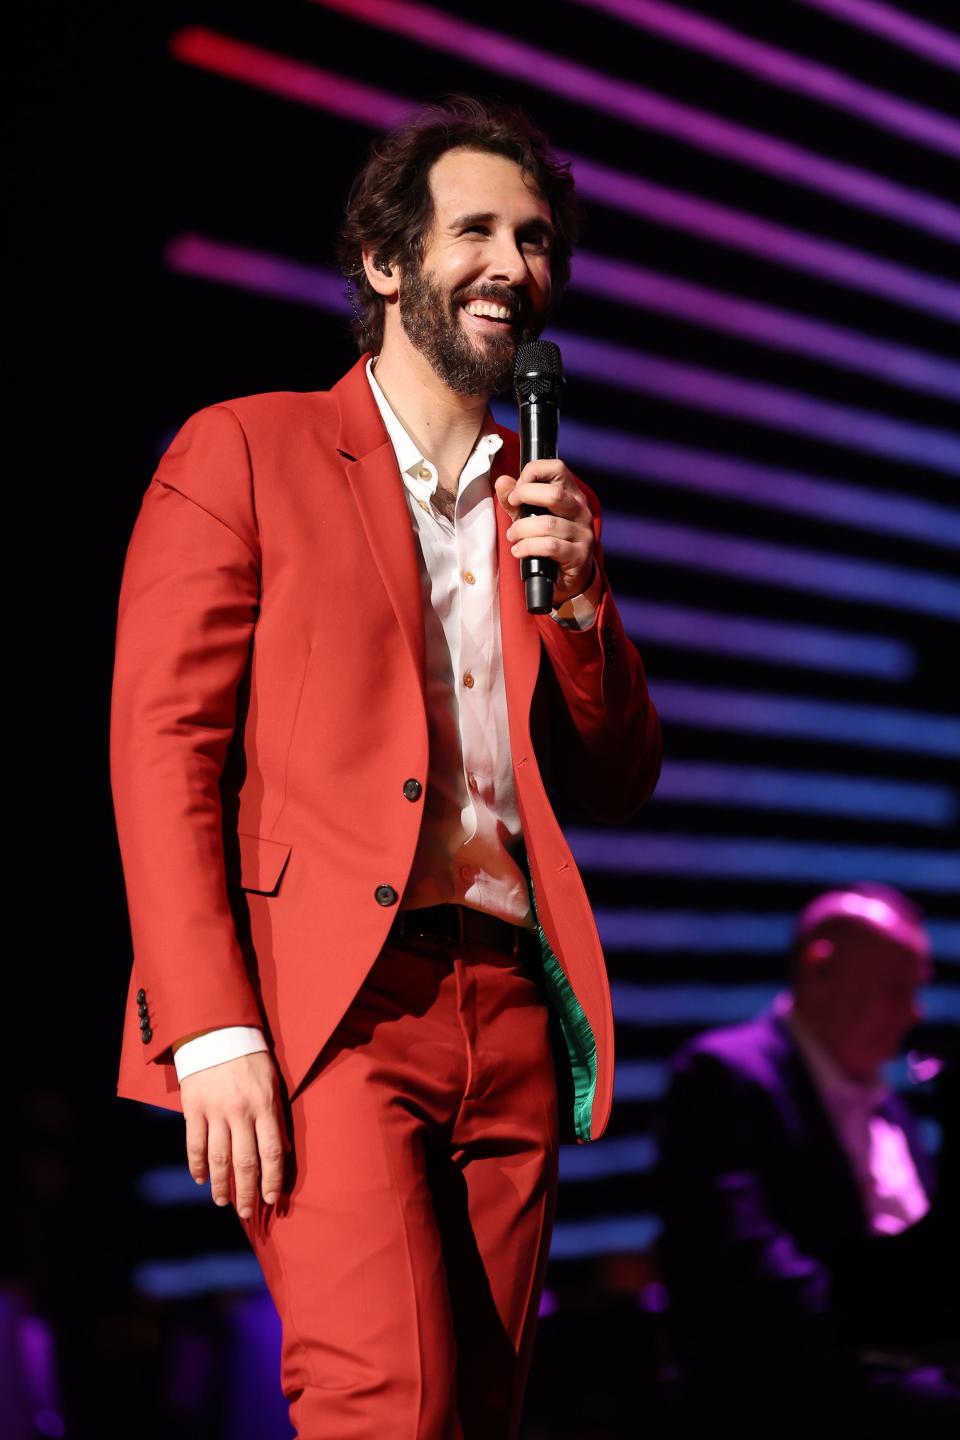 NEW YORK, NEW YORK - APRIL 08: Josh Groban performs onstage during Josh Groban's Great Big Radio City Show at Radio City Music Hall on April 08, 2022 in New York City. (Photo by Arturo Holmes/Getty Images for ABA) ORG XMIT: 775797590 ORIG FILE ID: 1390401891